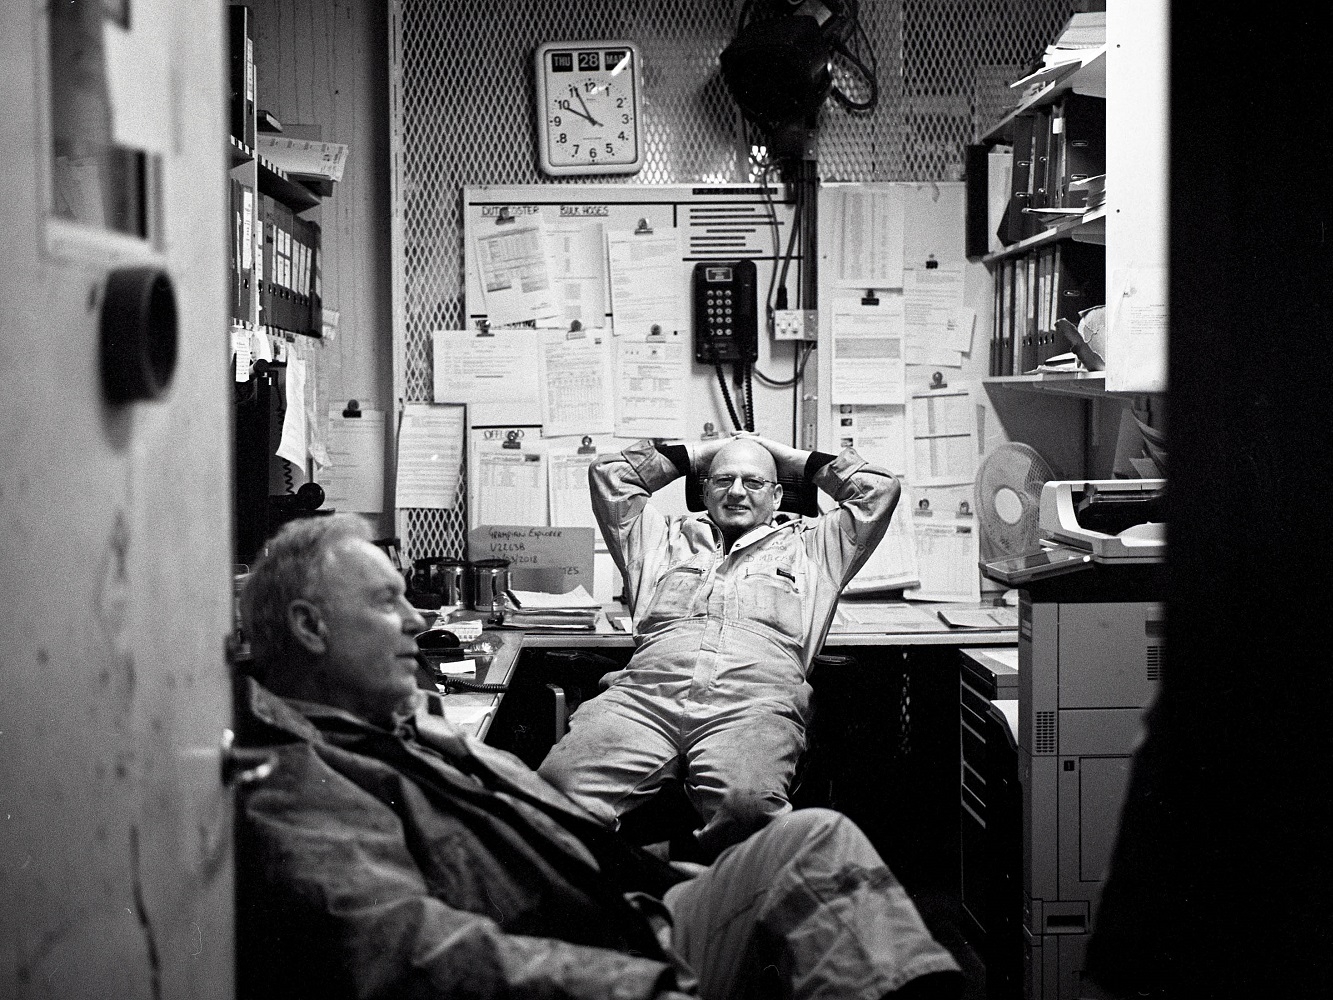 Two platform workers relaxing in an office space